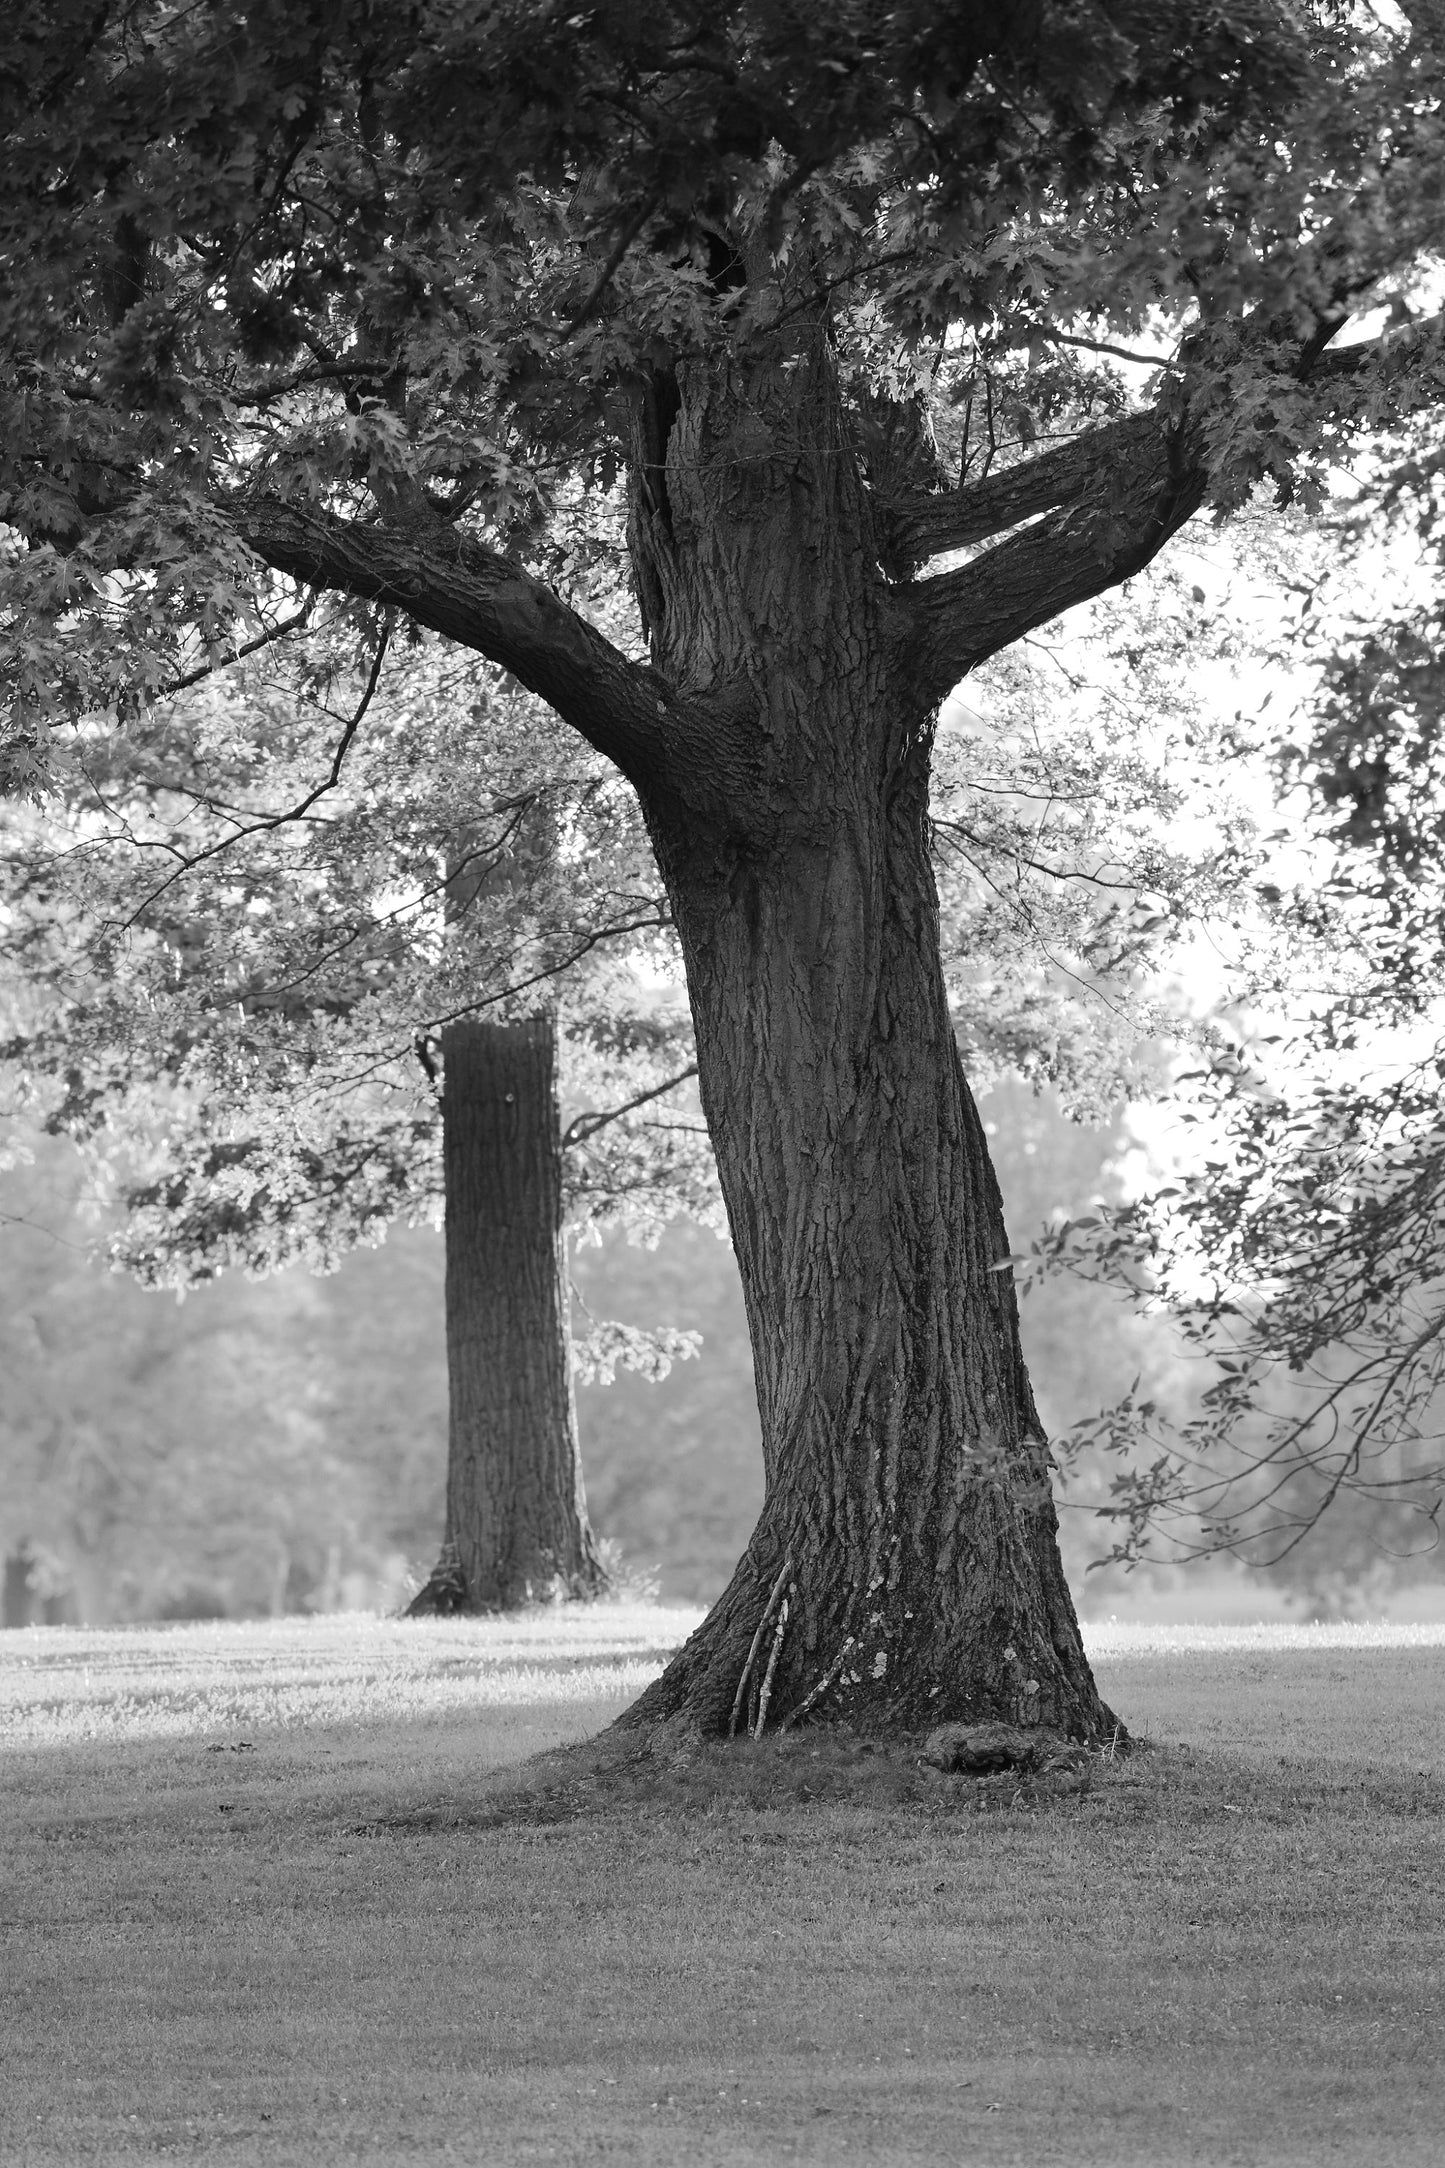 VERTICAL Oak Tree photo print, tree photography, black and white tree wall art, large tree picture, paper or canvas 5x7 8x10 11x14 to 32x48"